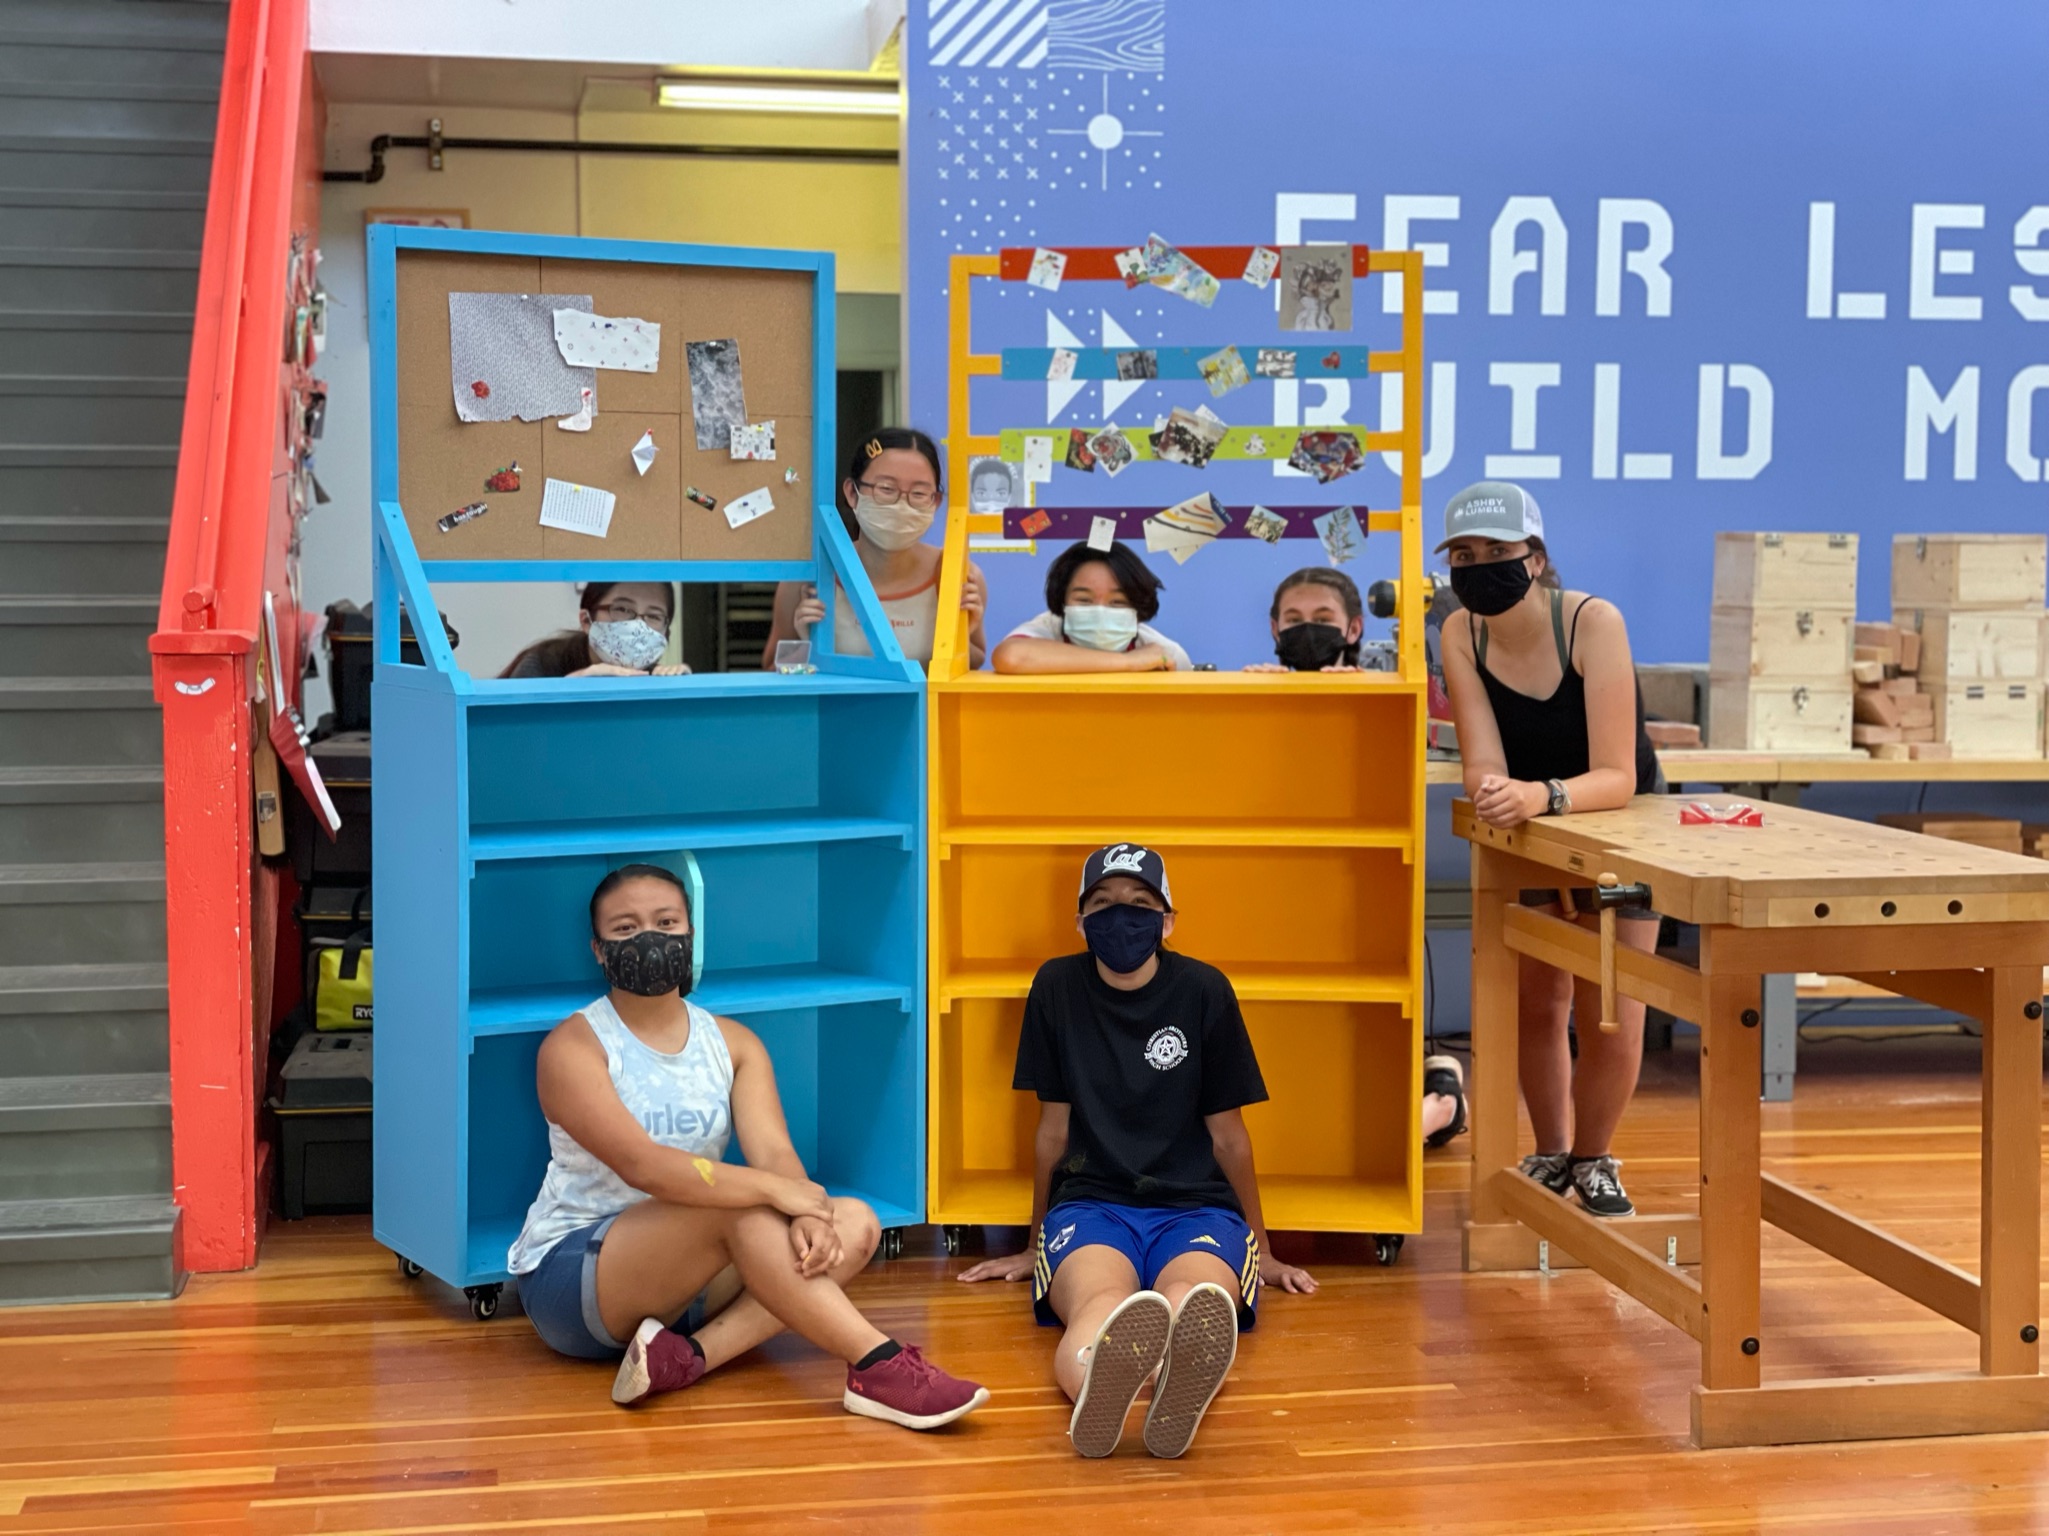 Library furniture built by teens at Girls Garage